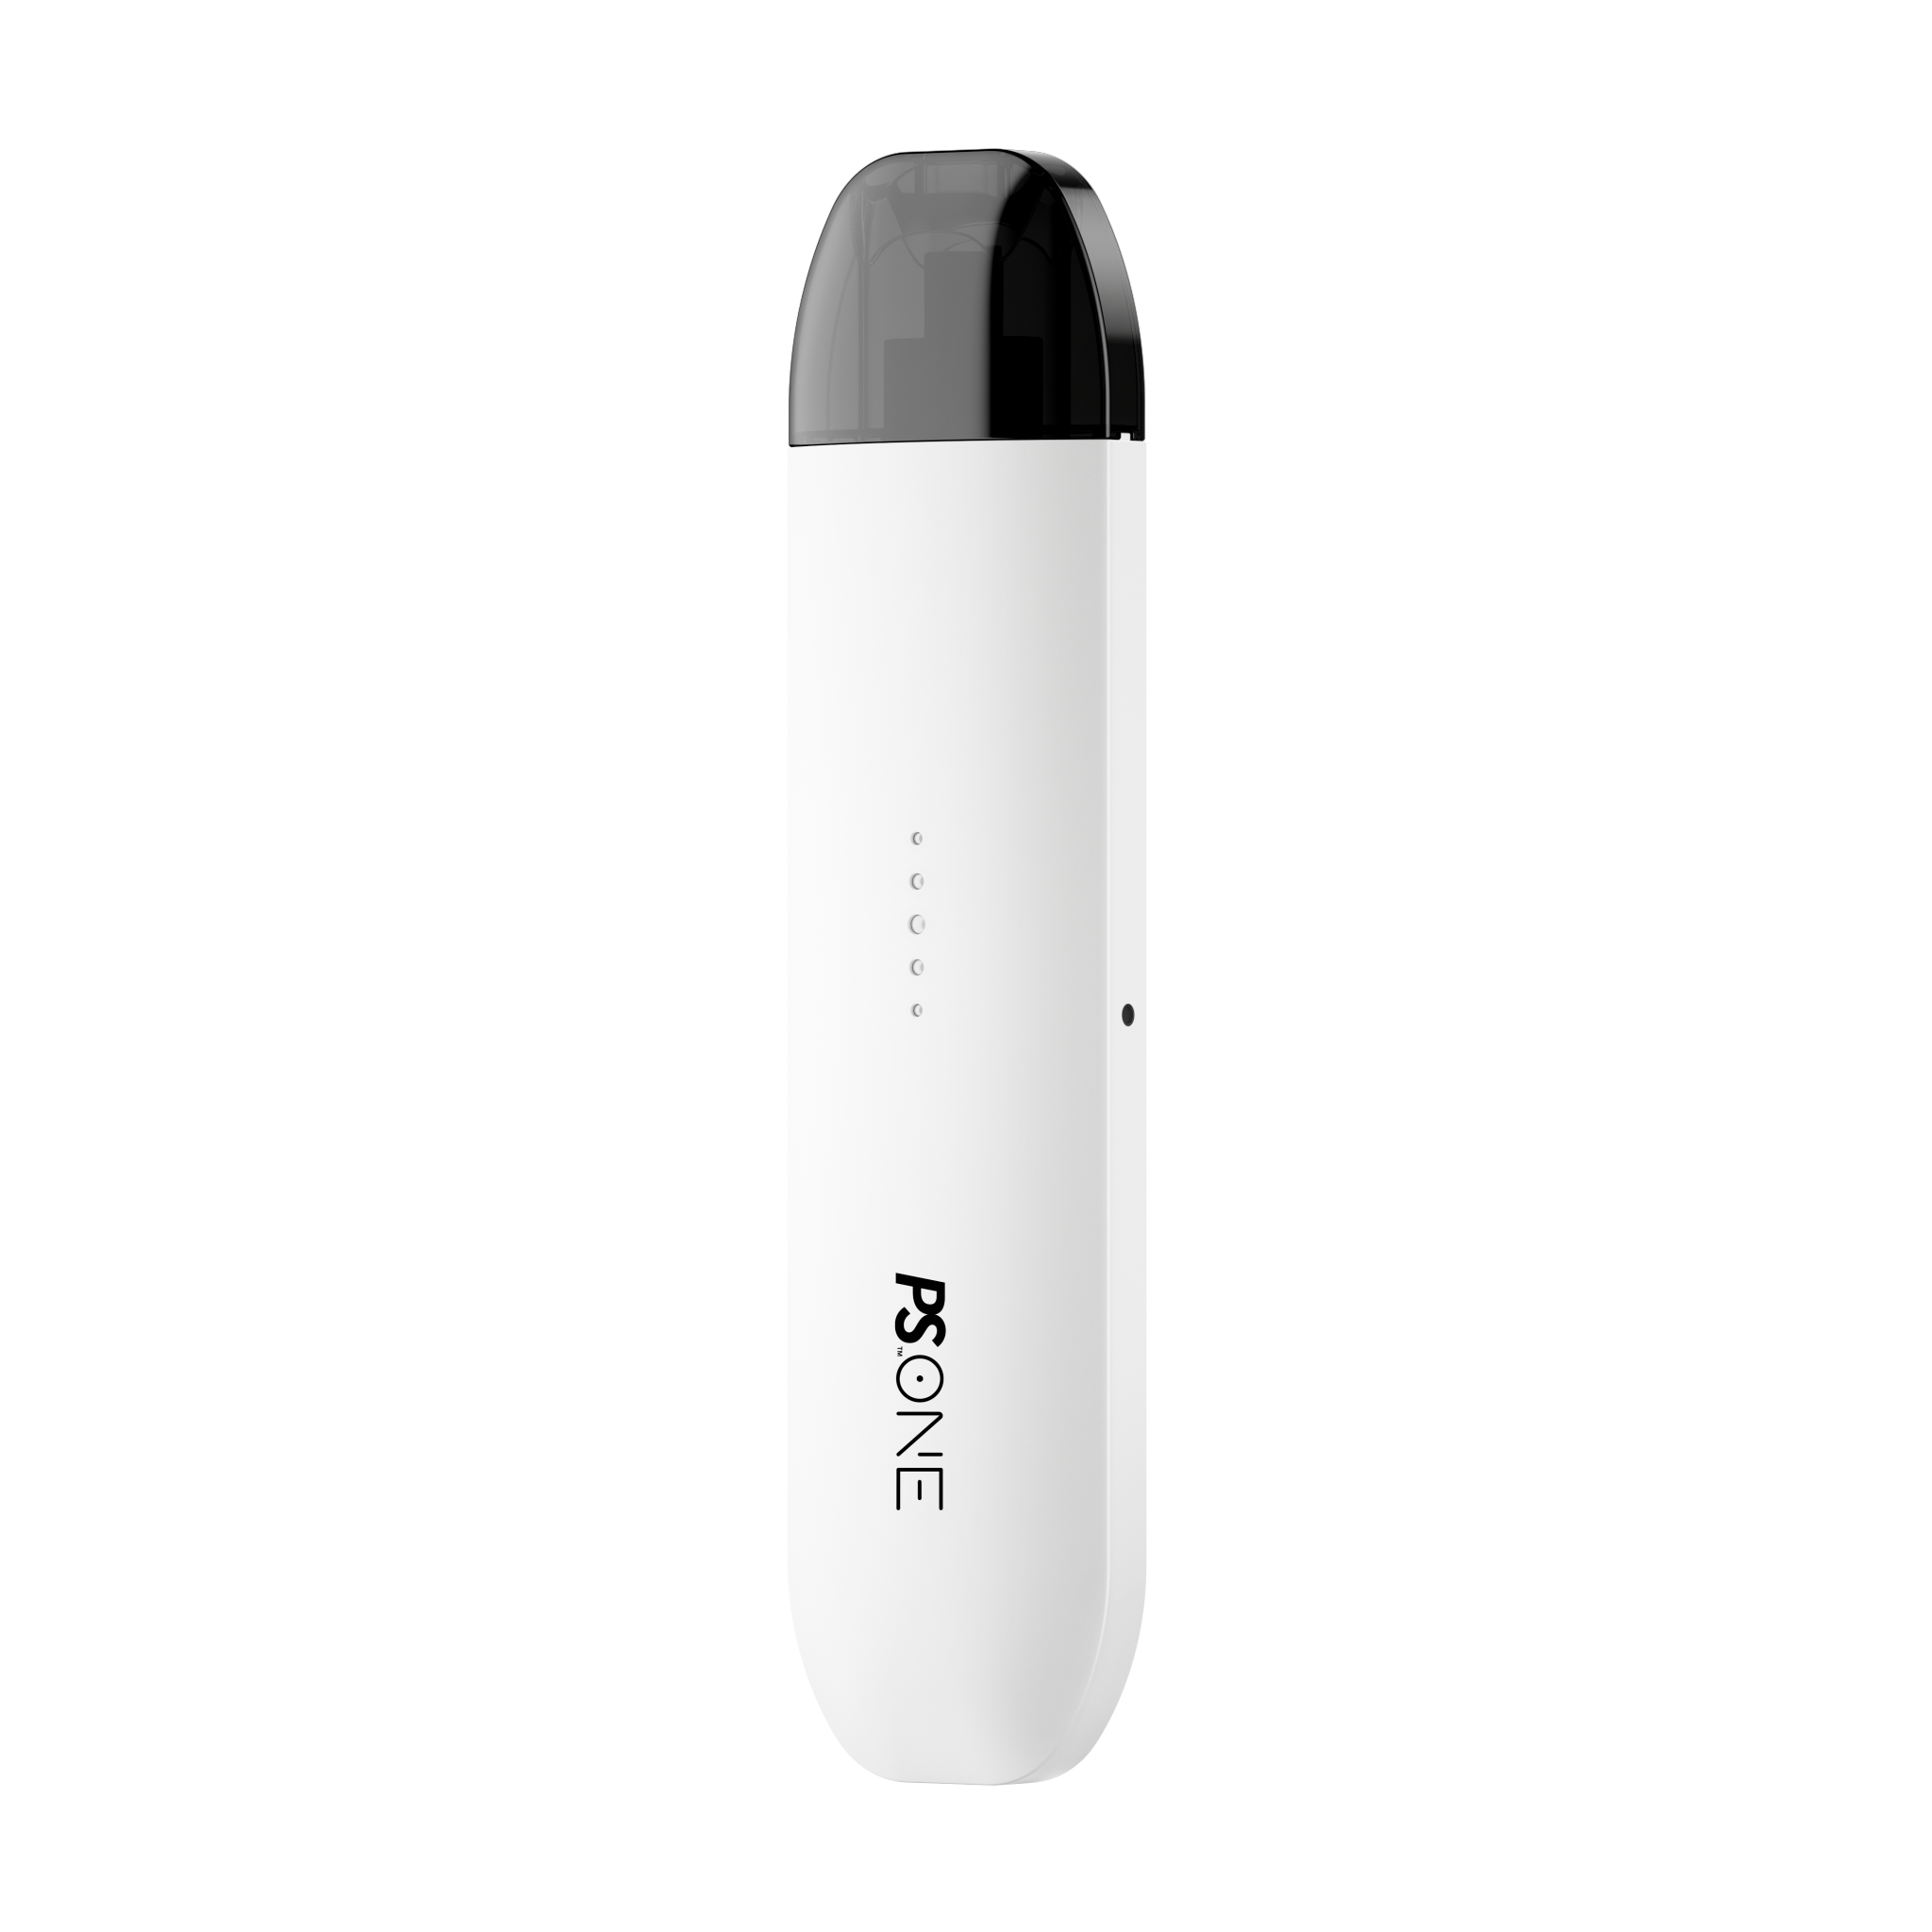 PS ONE CLOSED POD SYSTEM VAPING DEVICE- SNOW - My Vapery South Africa